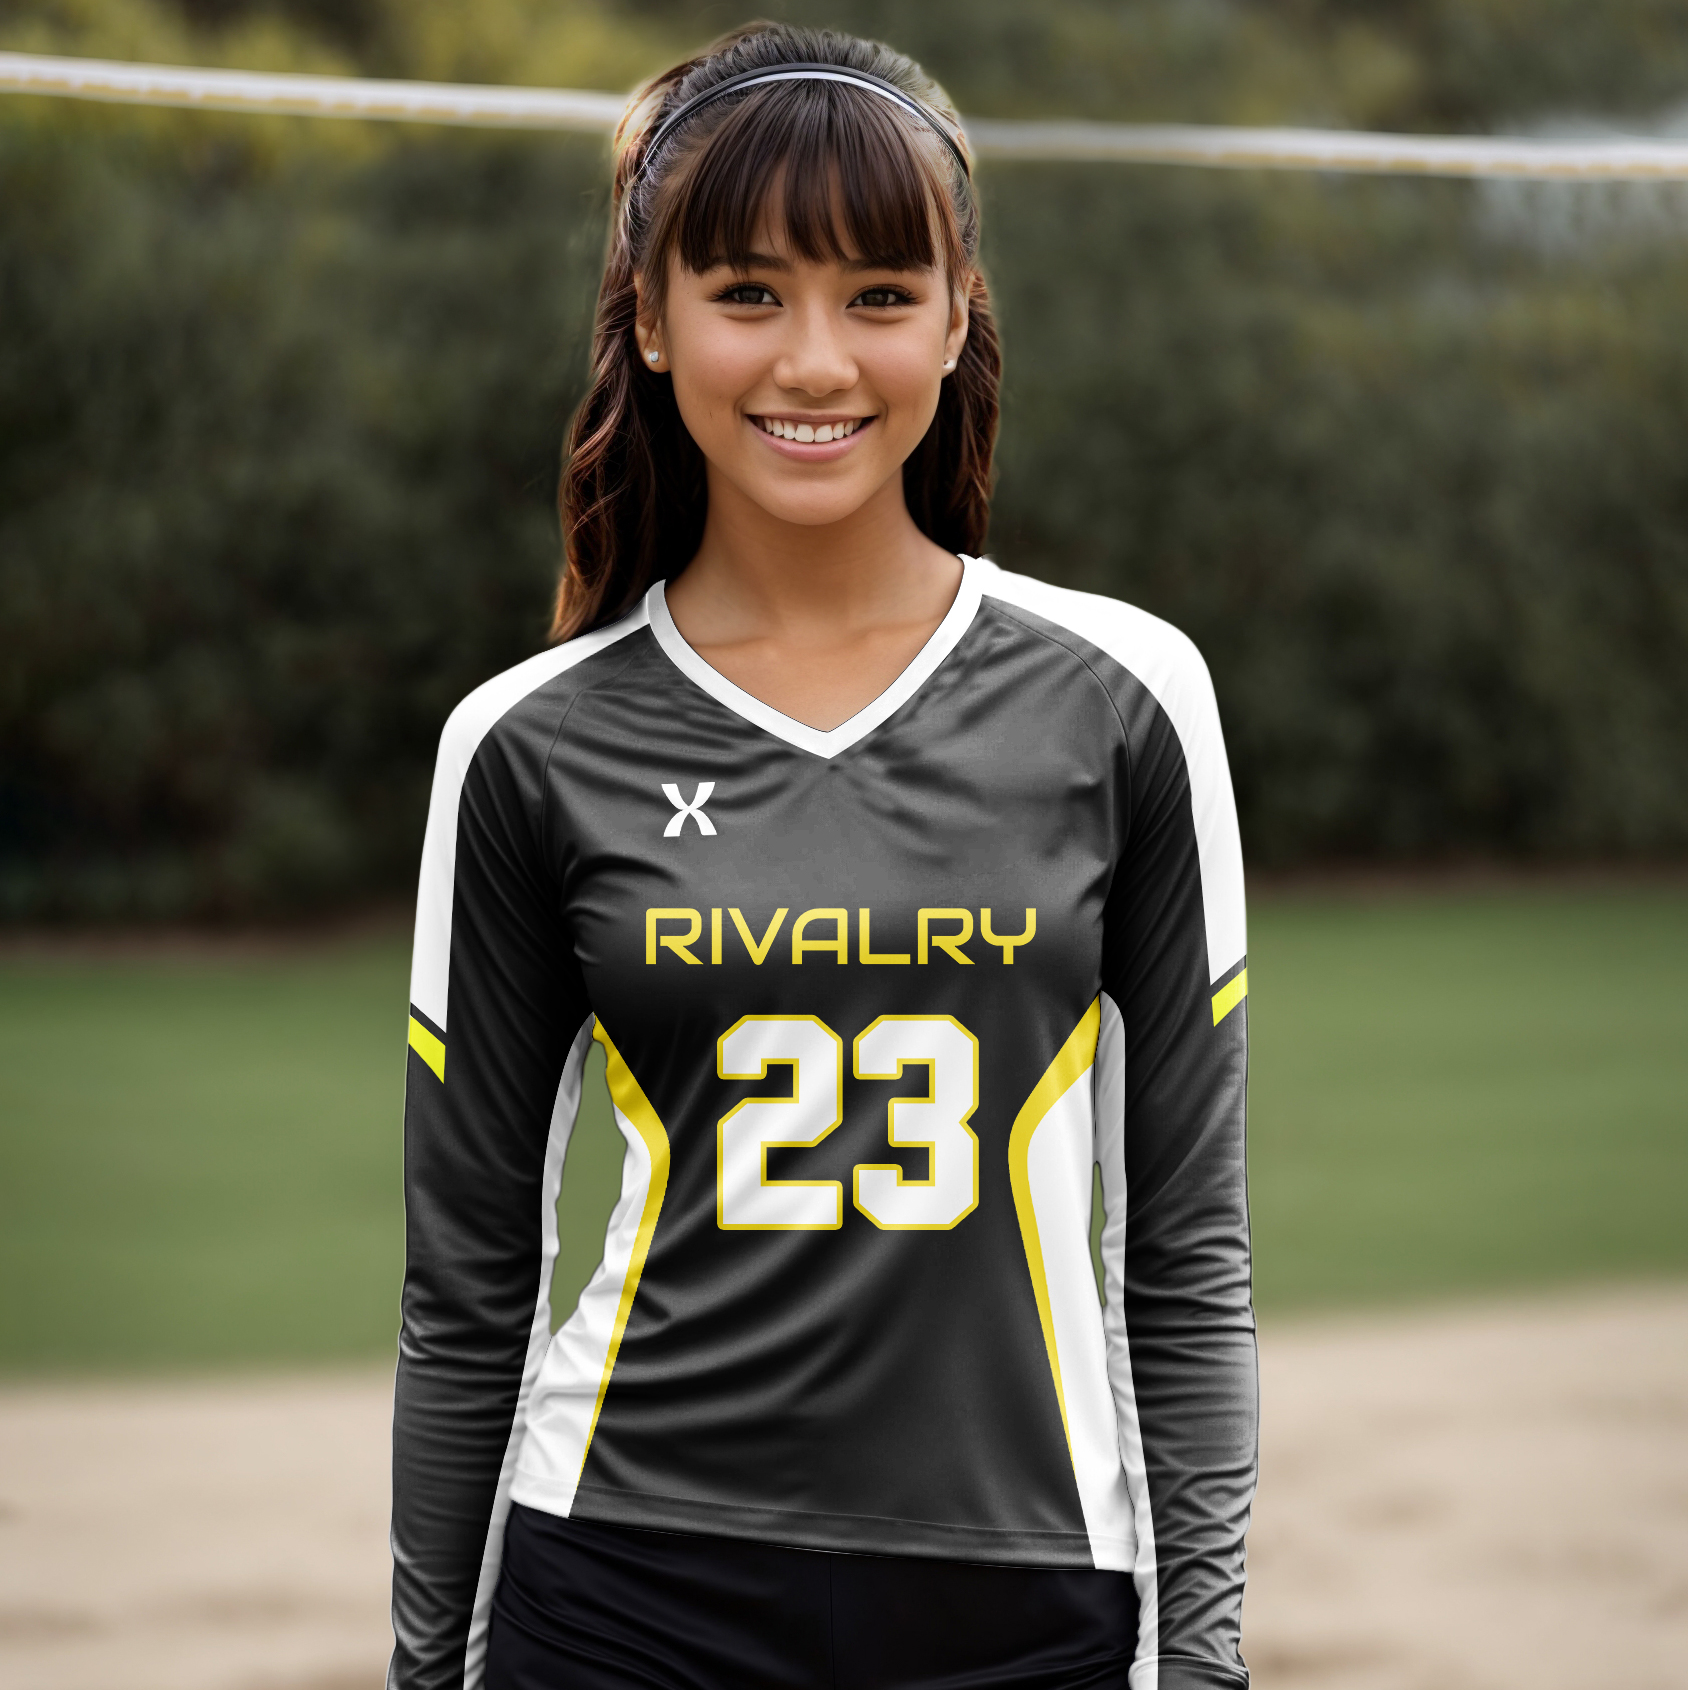 Rivalry Volleyball Jersey